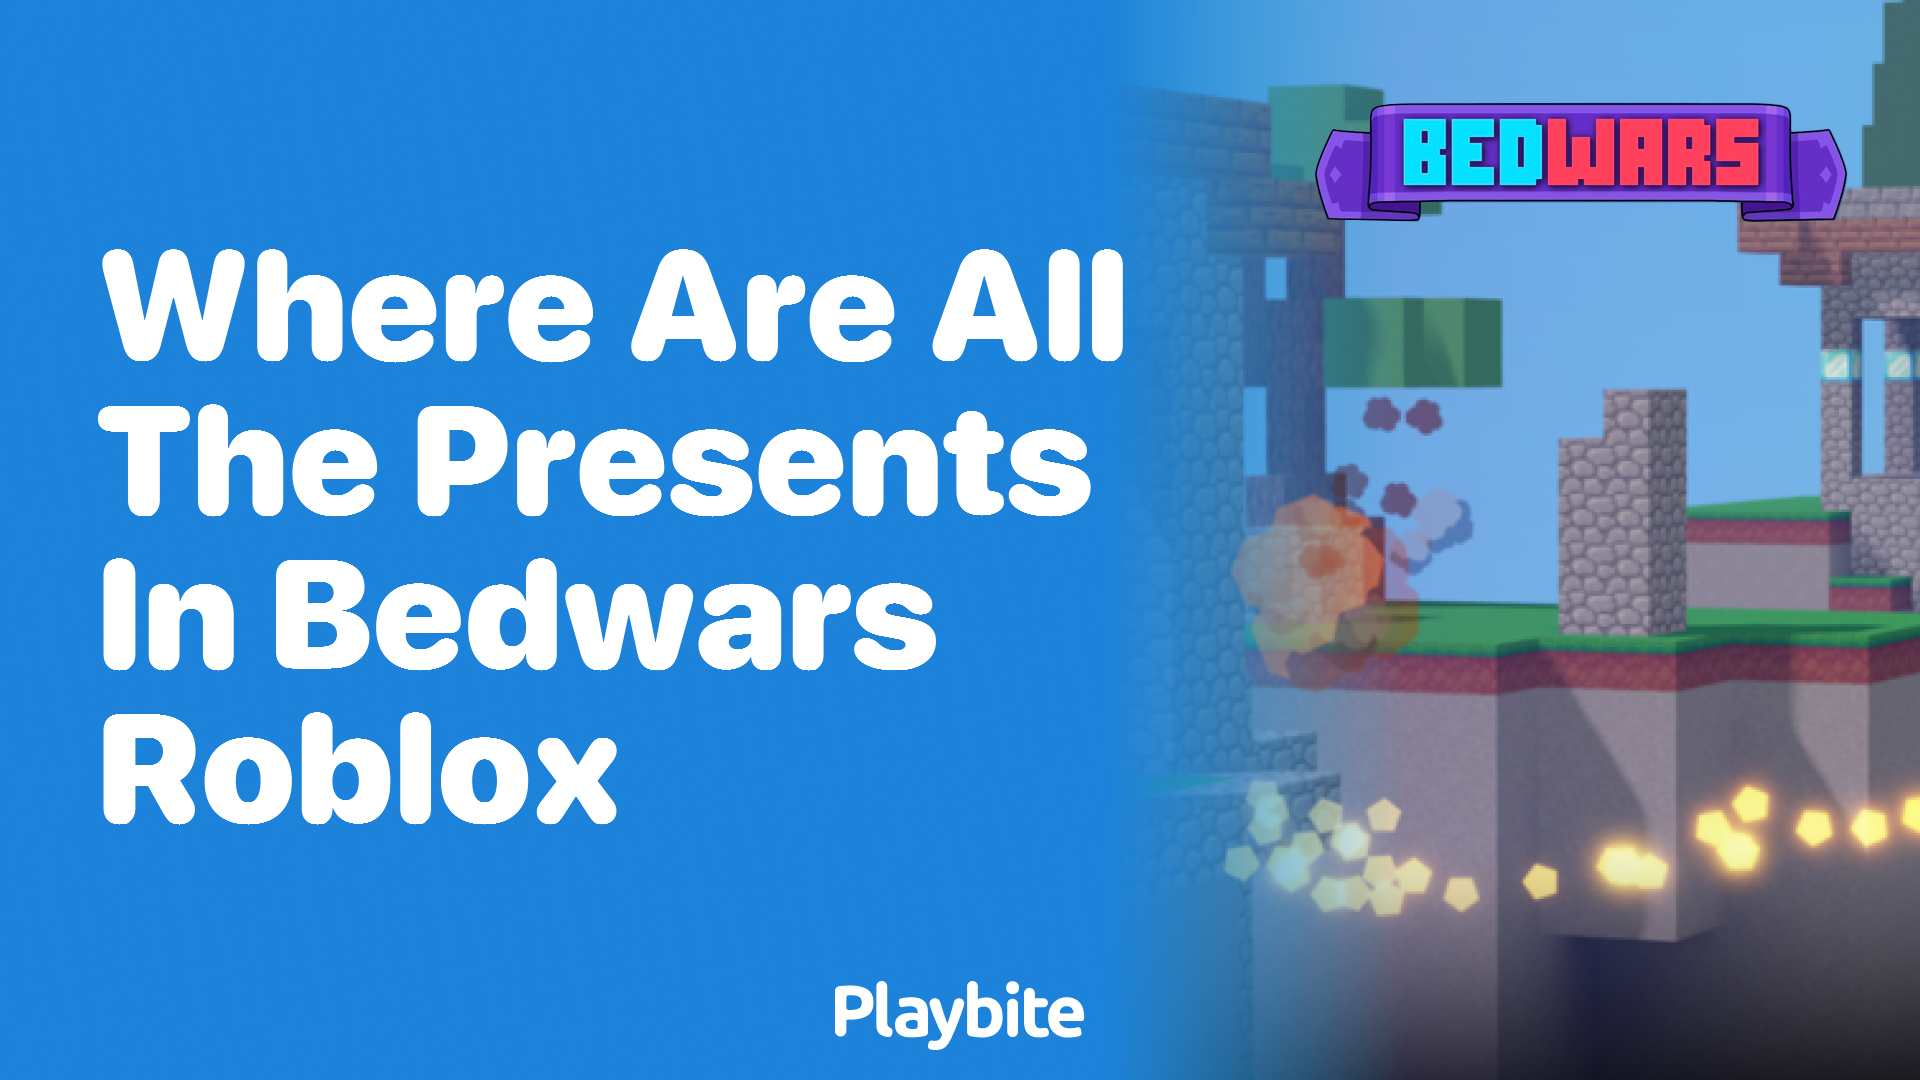 Where are all the presents in Bedwars Roblox?